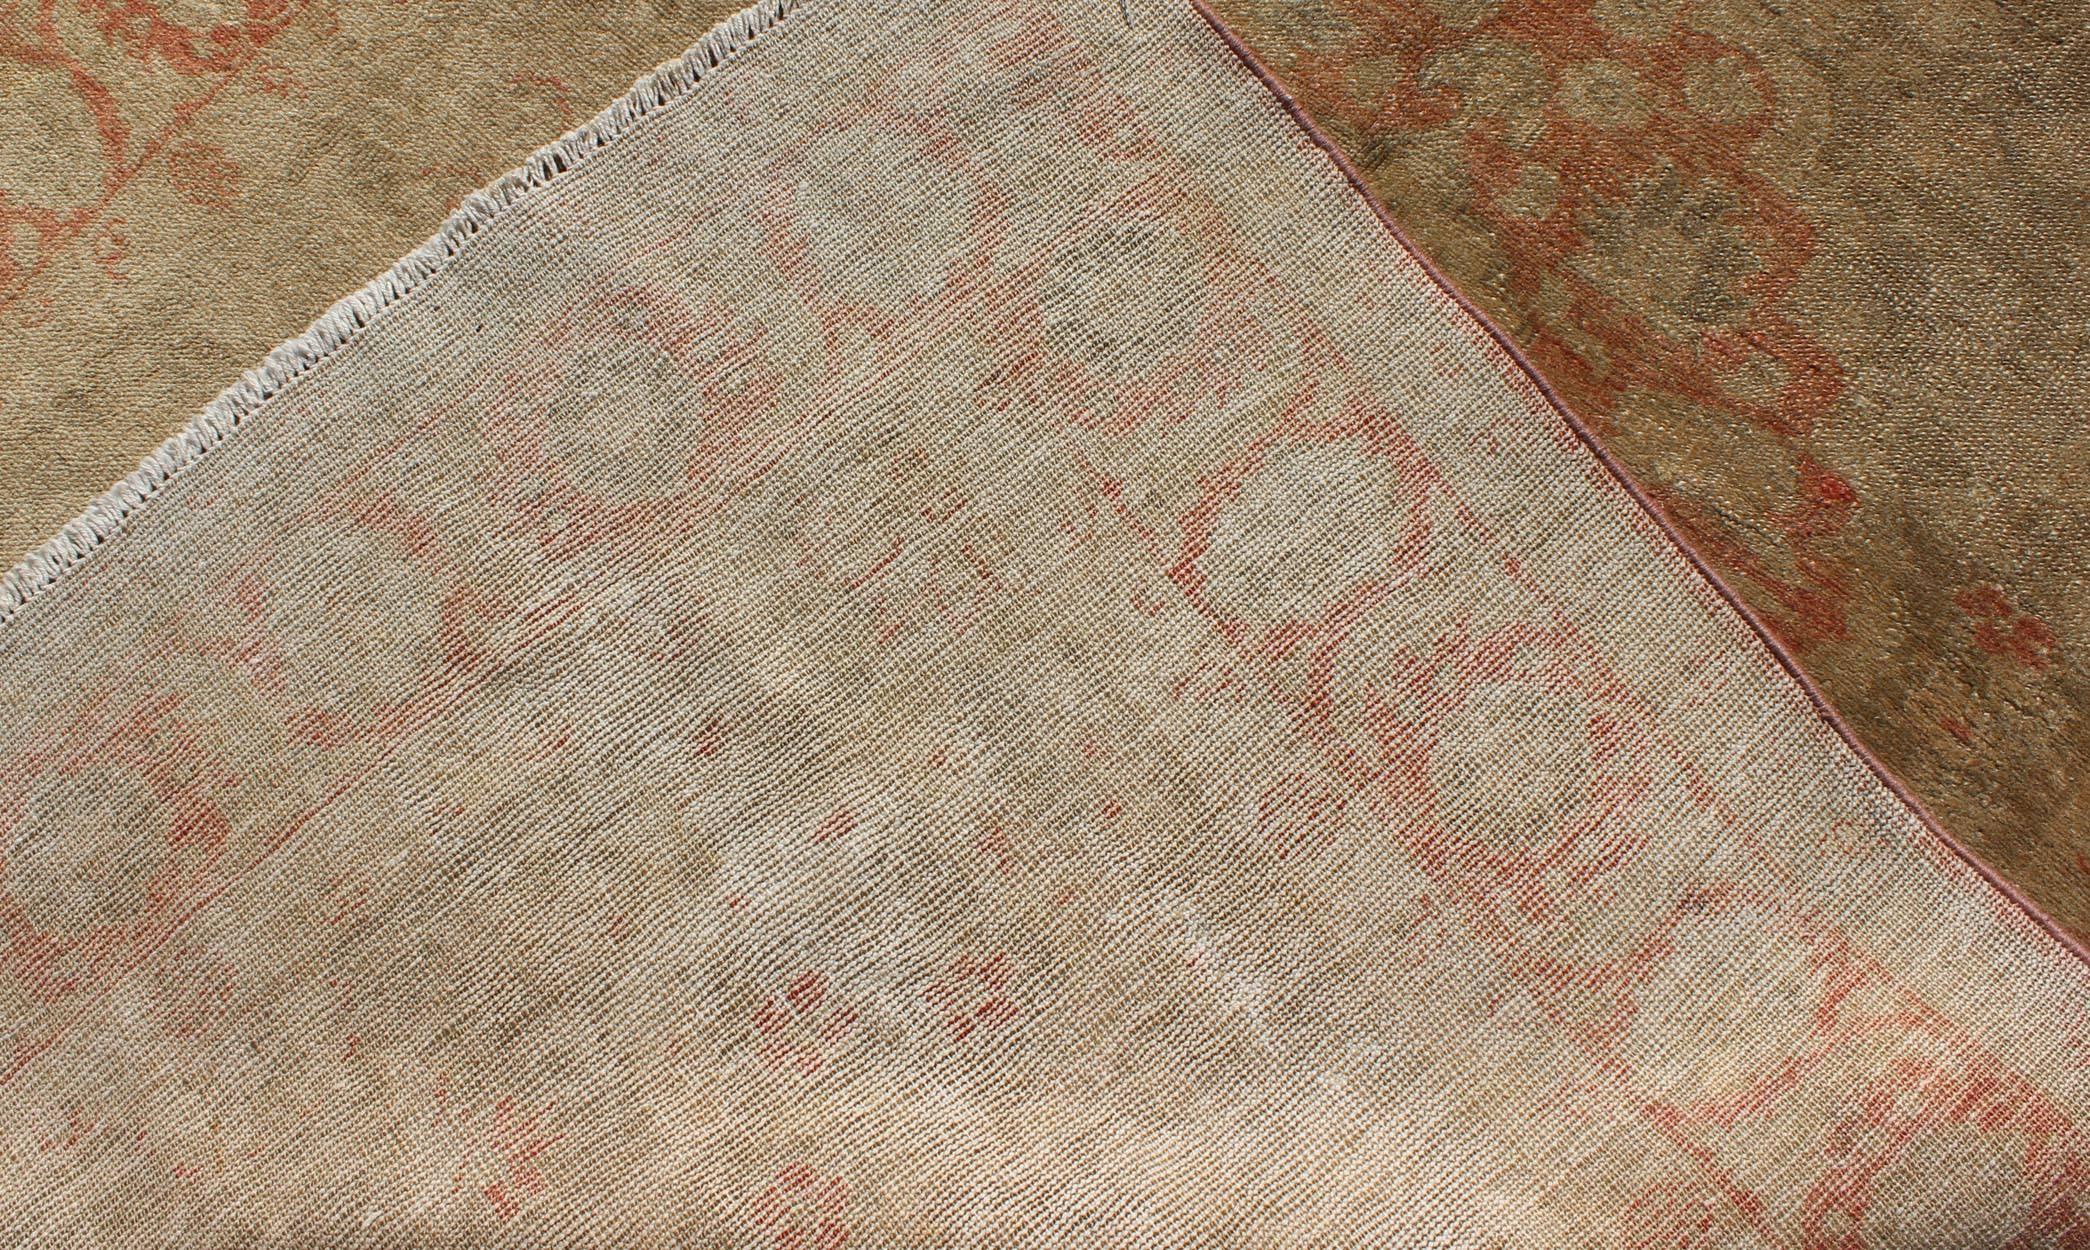 Muted Fine-Weave Sivas Rug with Botanical and Floral Elements in Red & Tan In Excellent Condition For Sale In Atlanta, GA